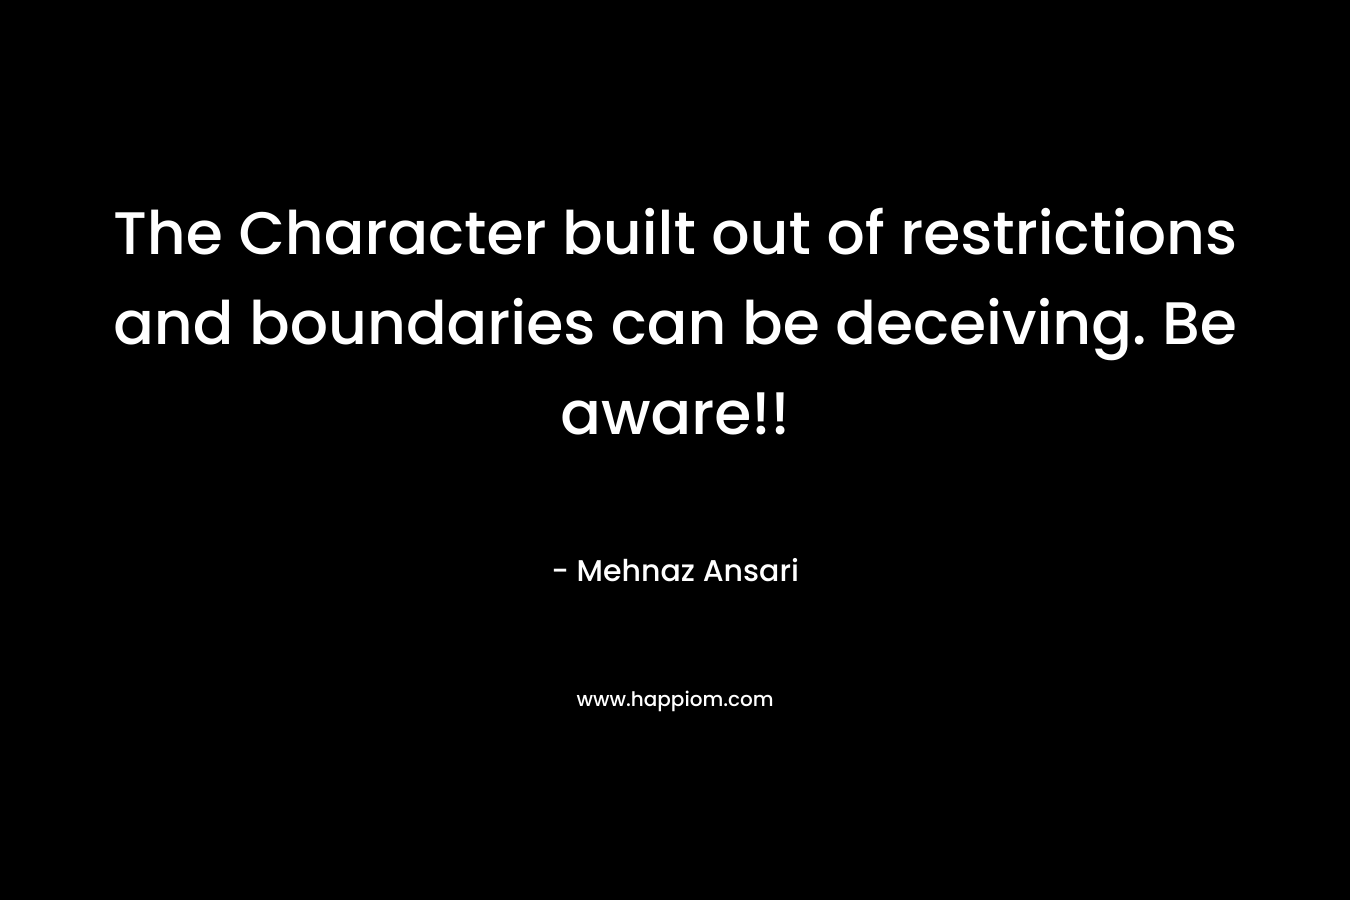 The Character built out of restrictions and boundaries can be deceiving. Be aware!!